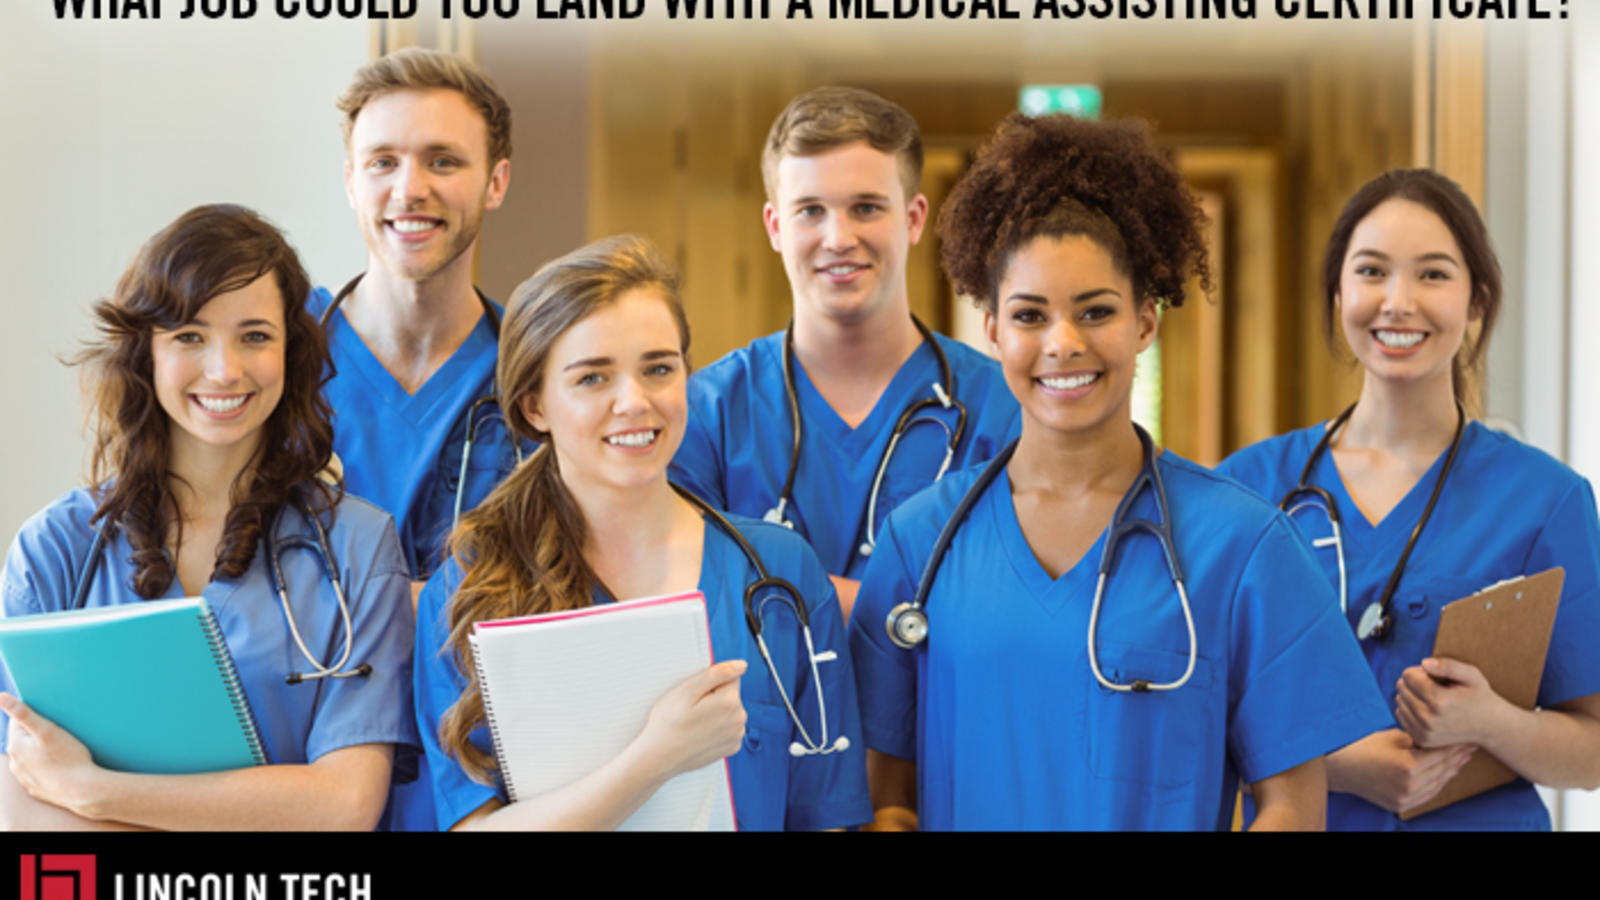 medical assistant jobs near me night shift